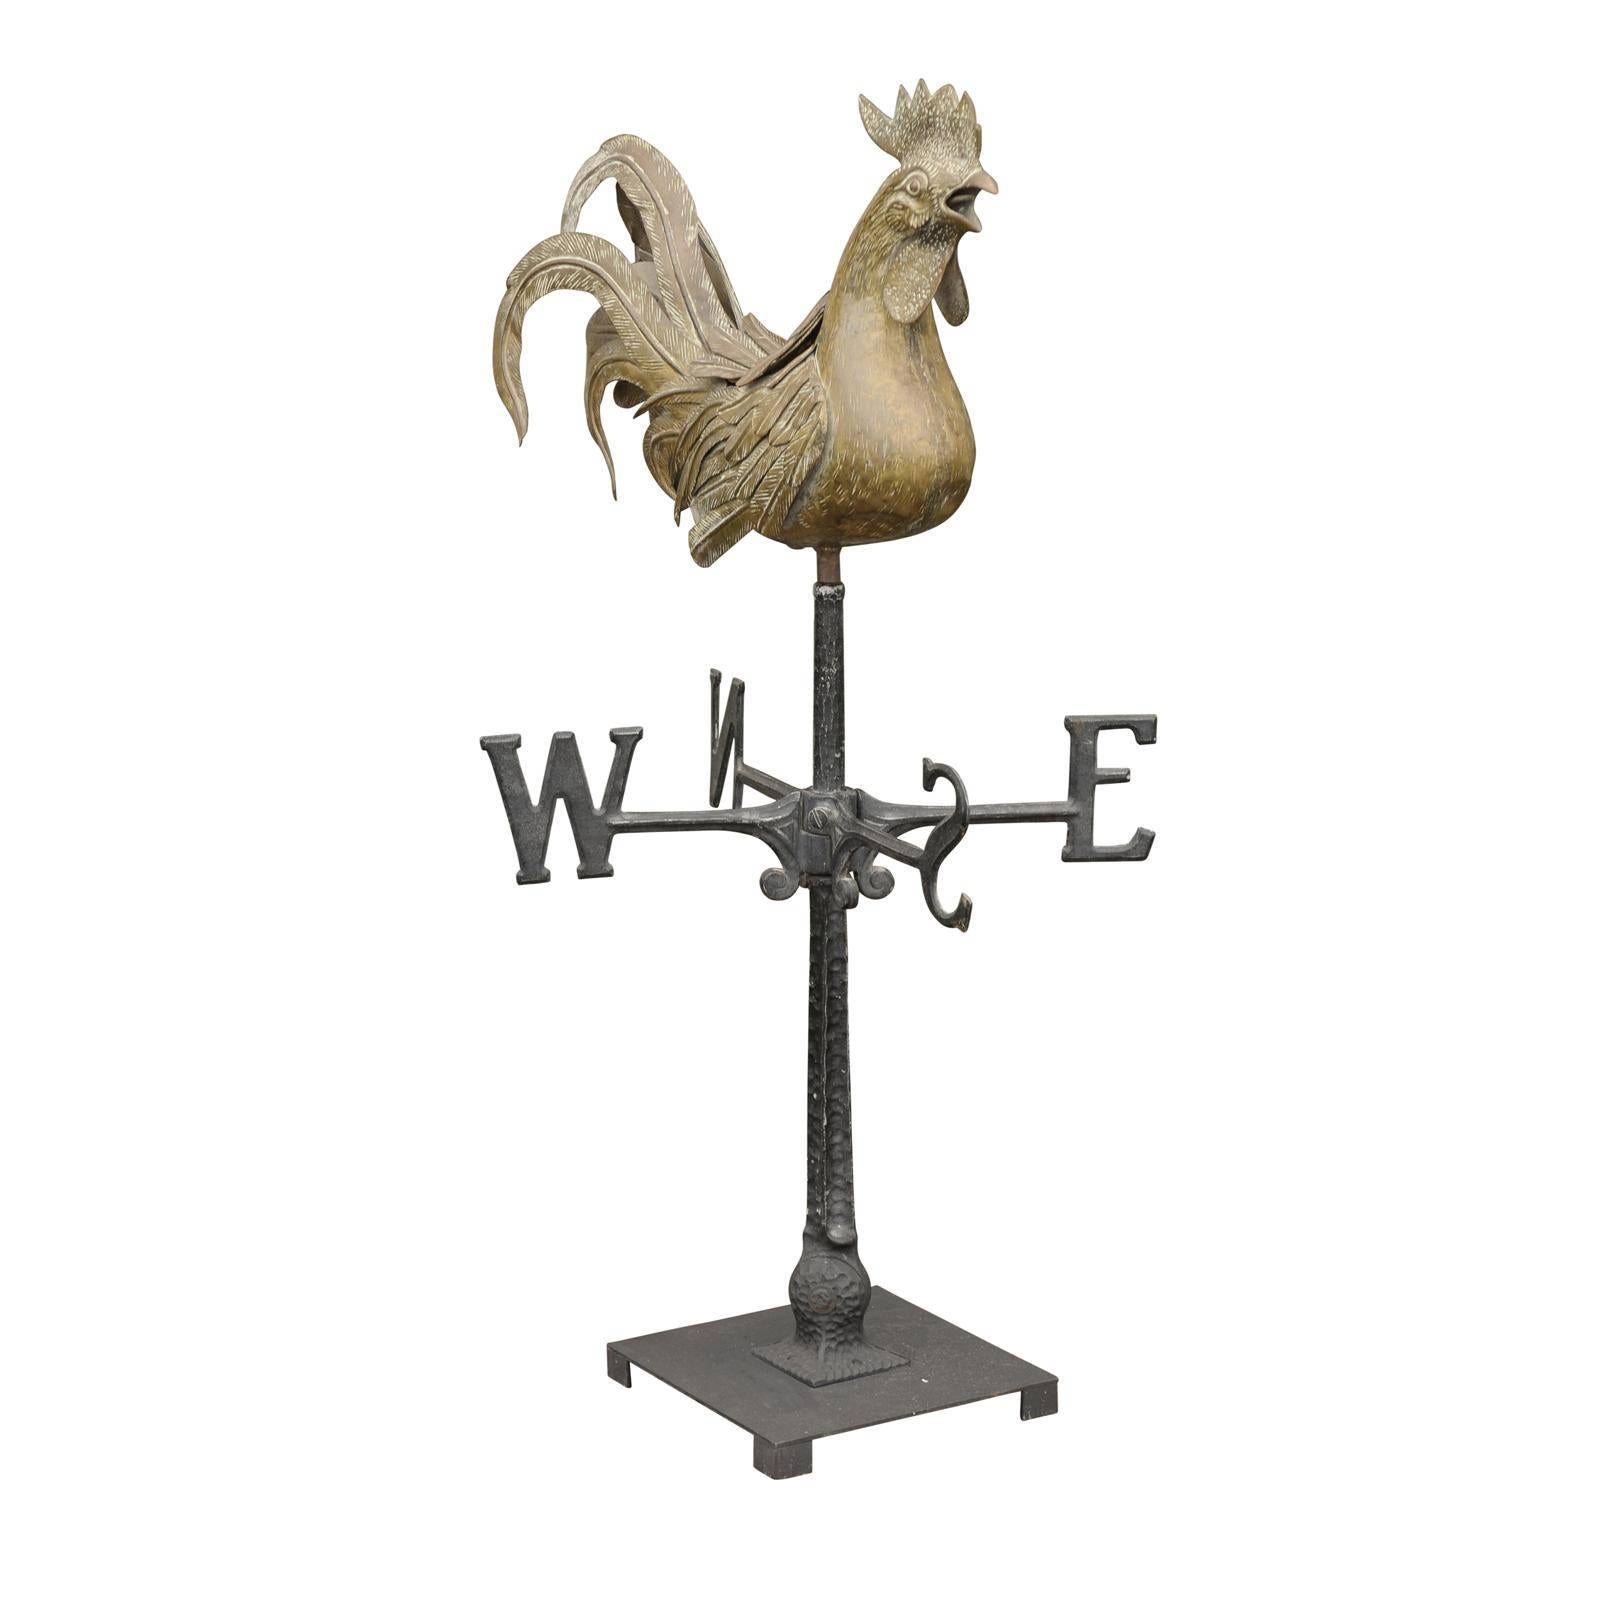 Vintage Italian Brass Rooster Weathervane on Iron Base from the Mid 20th Century